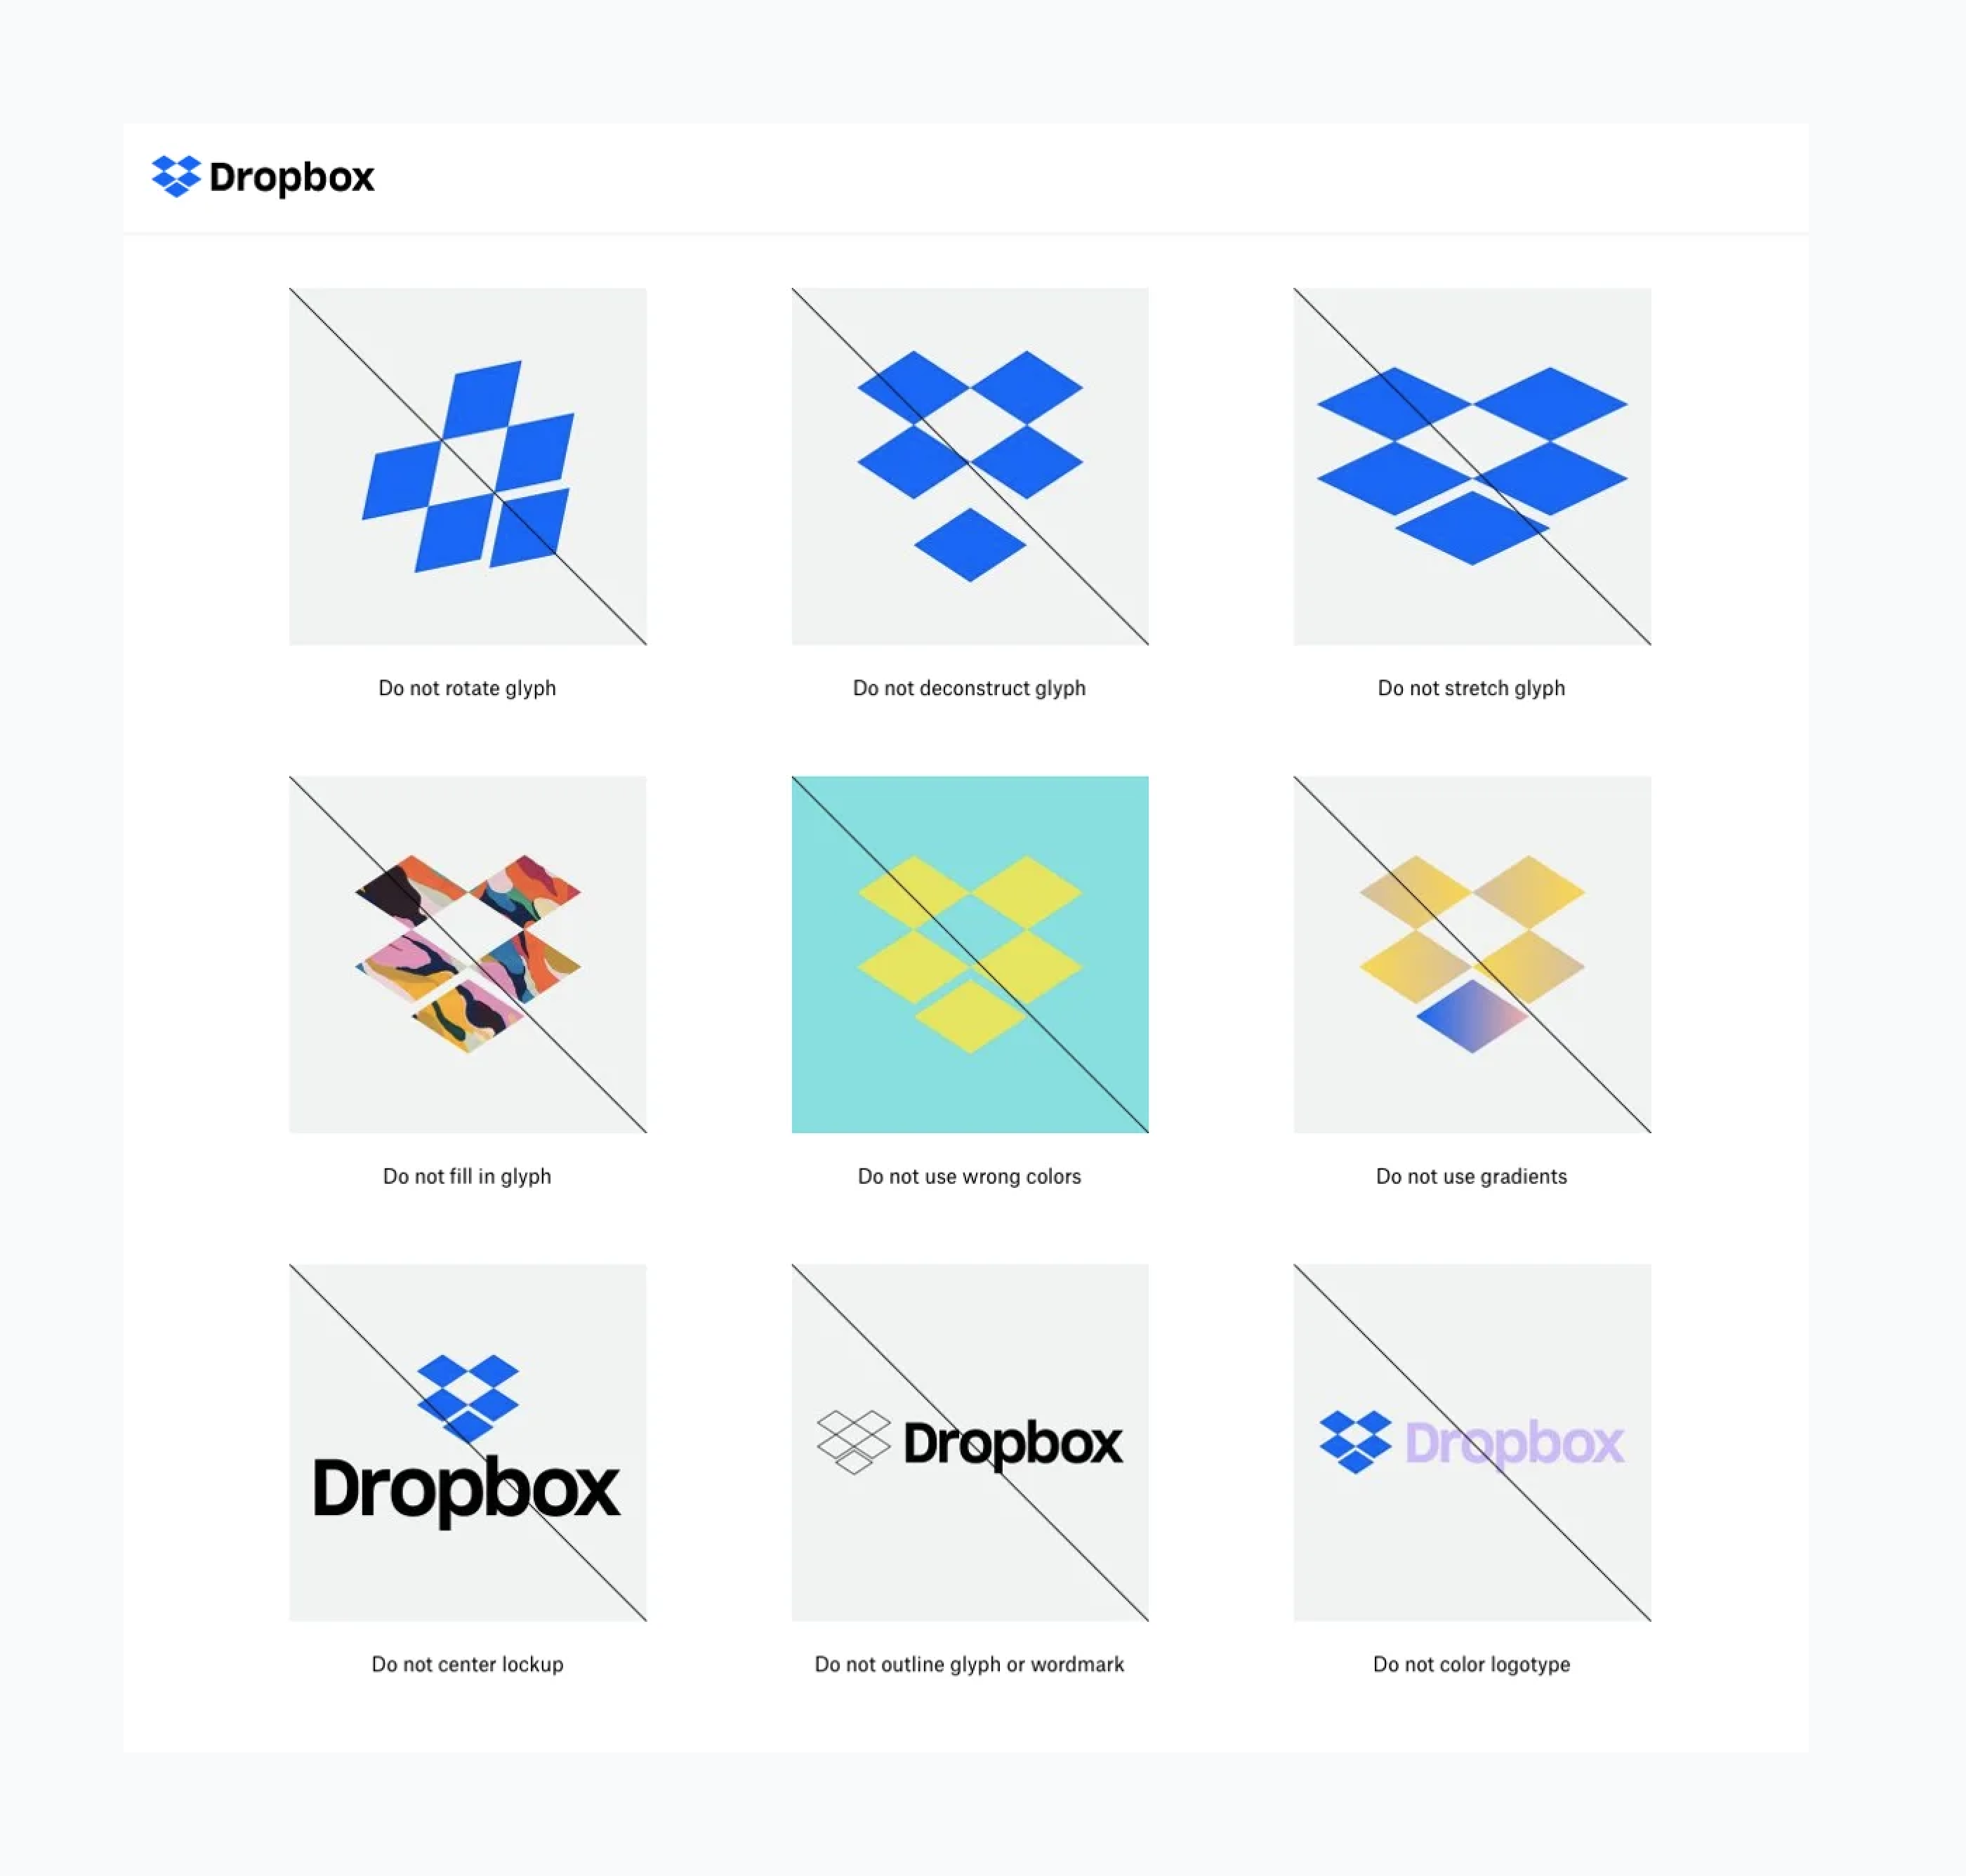 Dropbox provides guidelines on logo use in their press kit.